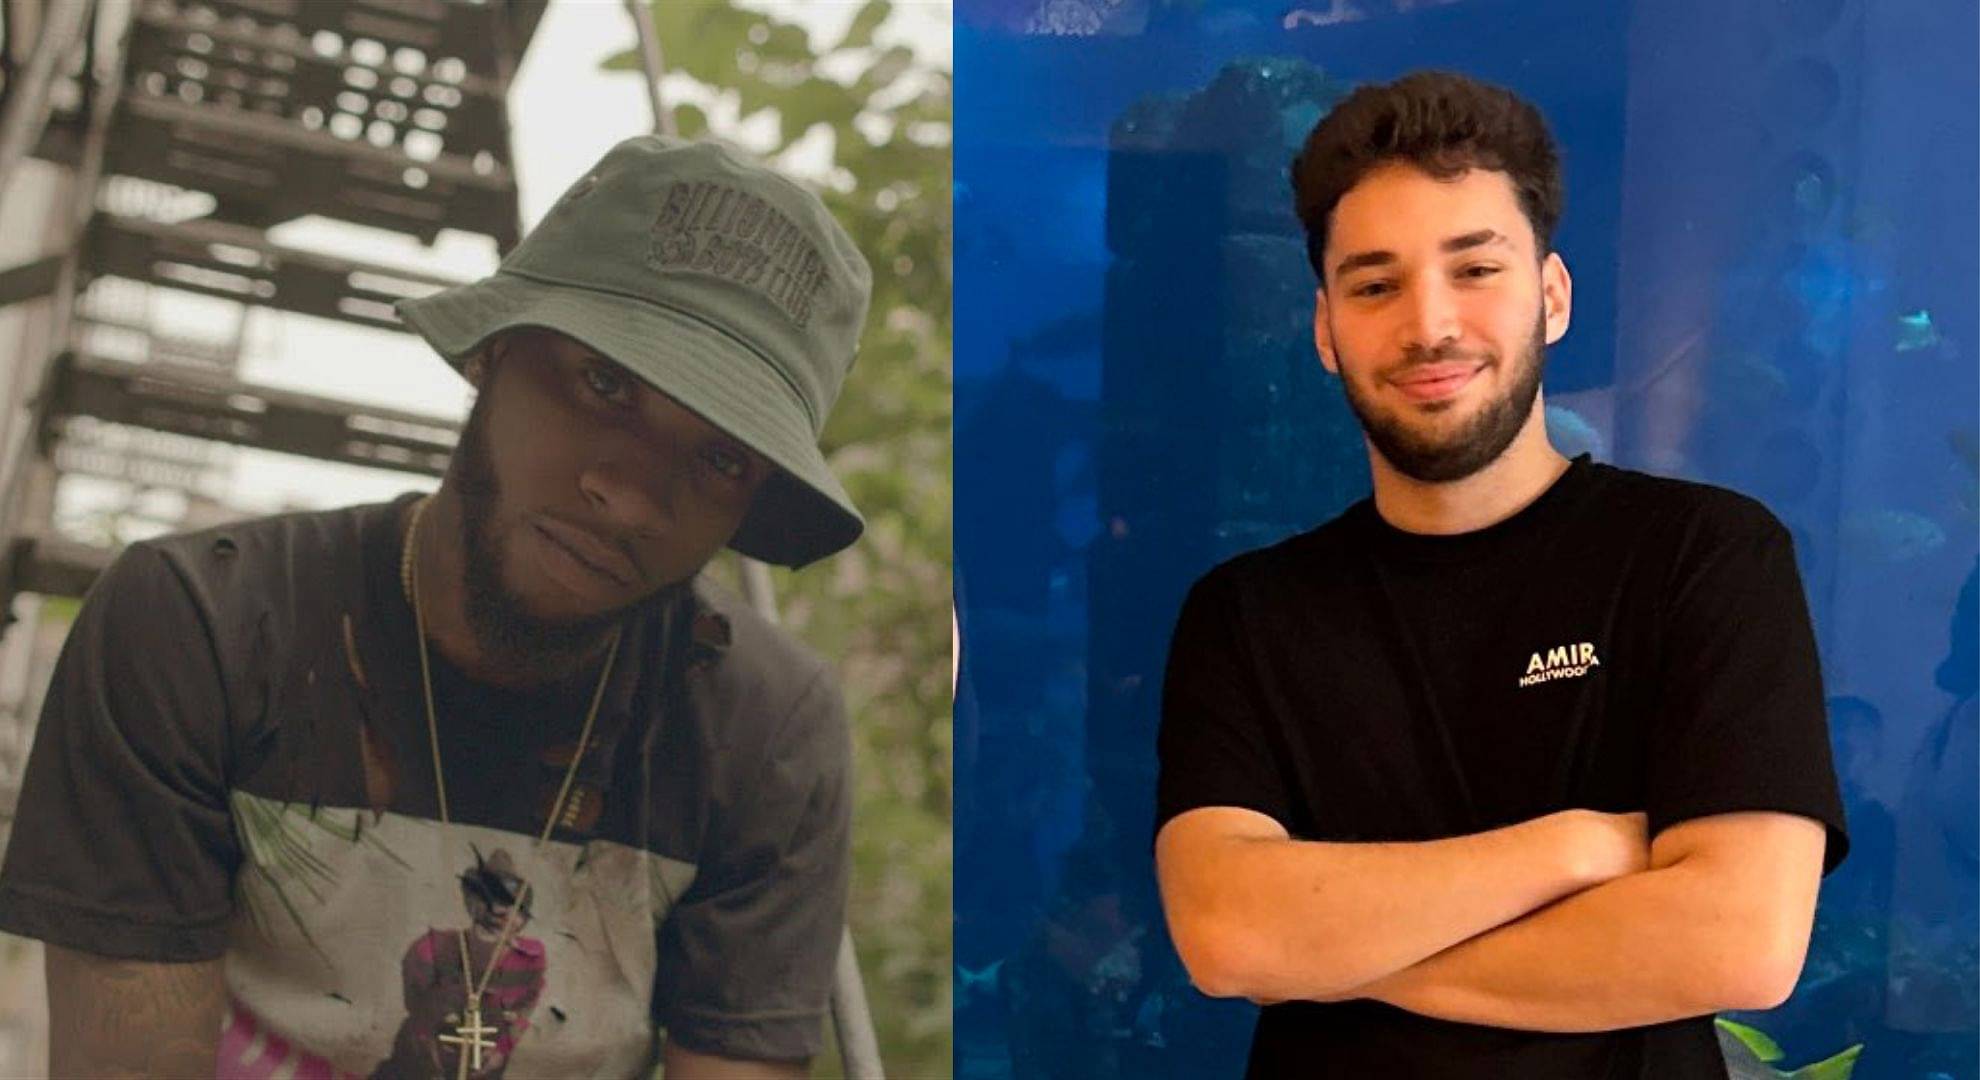 Adin Ross speaks in support of Tory Lanez and support Free Tory